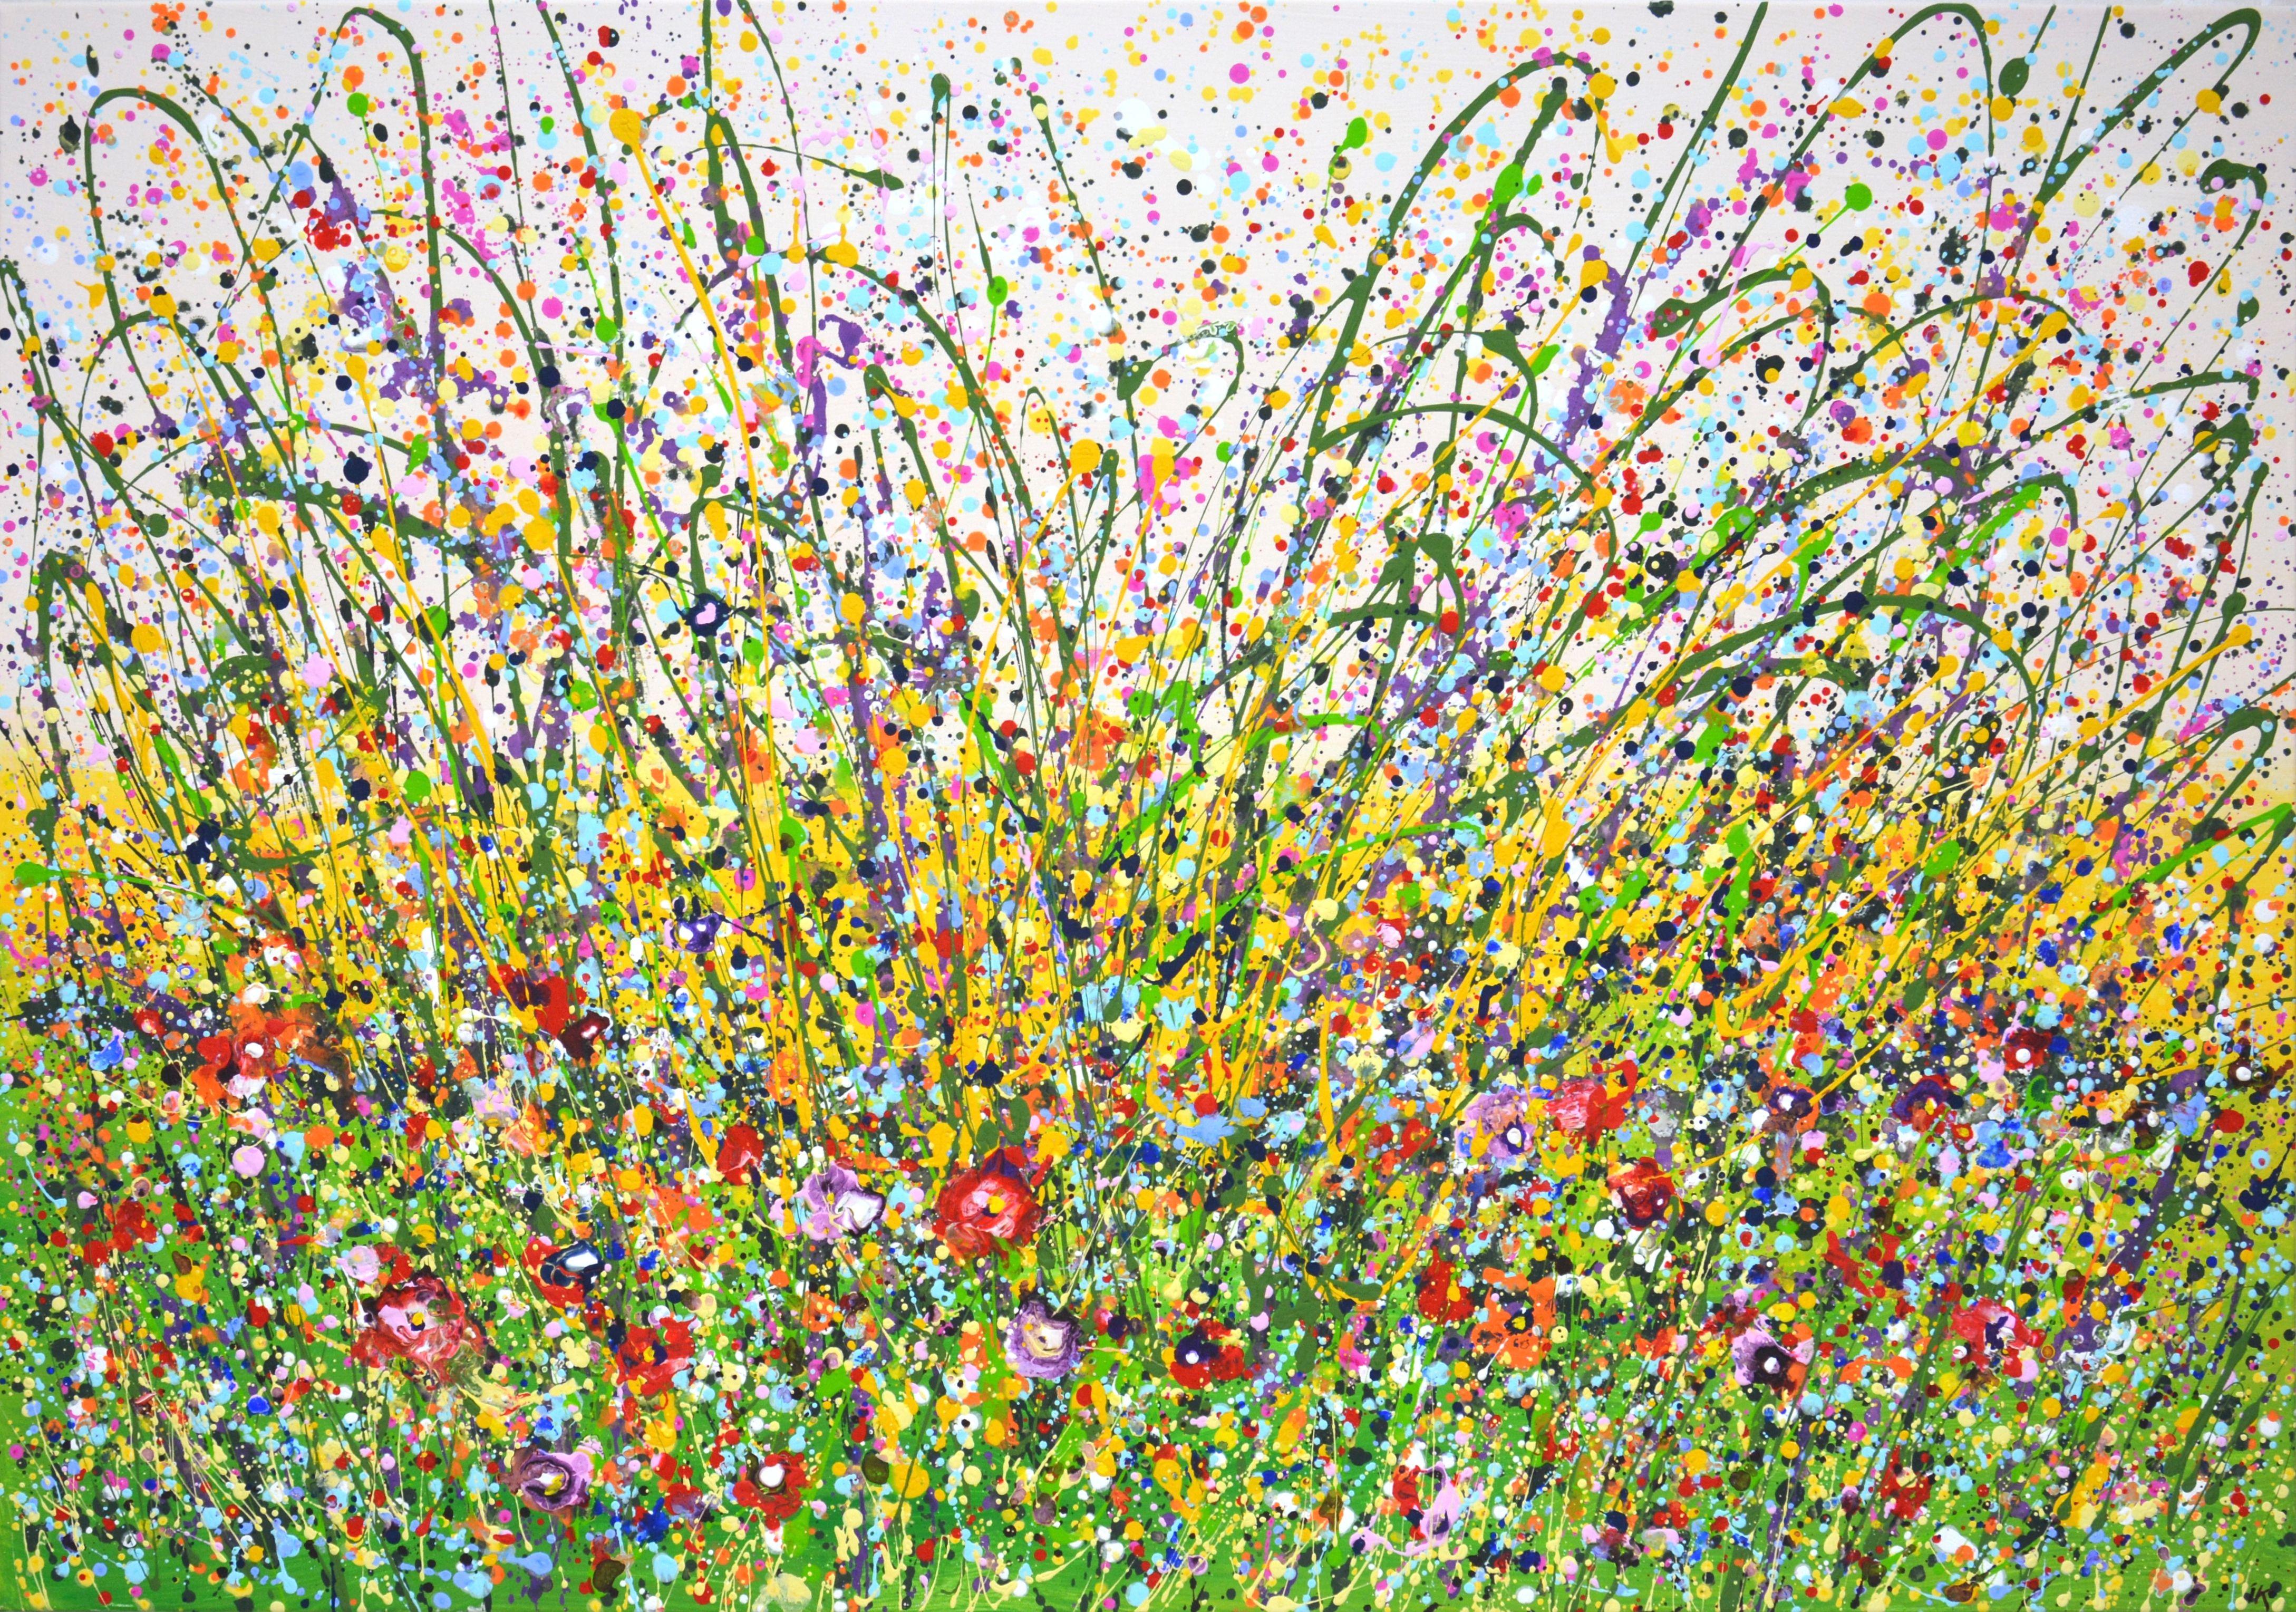 Flower field. Summer. A celebration of colorful flowers and herbs on a summer day creates an atmosphere of relaxation, harmony and bliss. Abstract expressionism. The painting is painted using the technique of dripping and splashing paint onto canvas